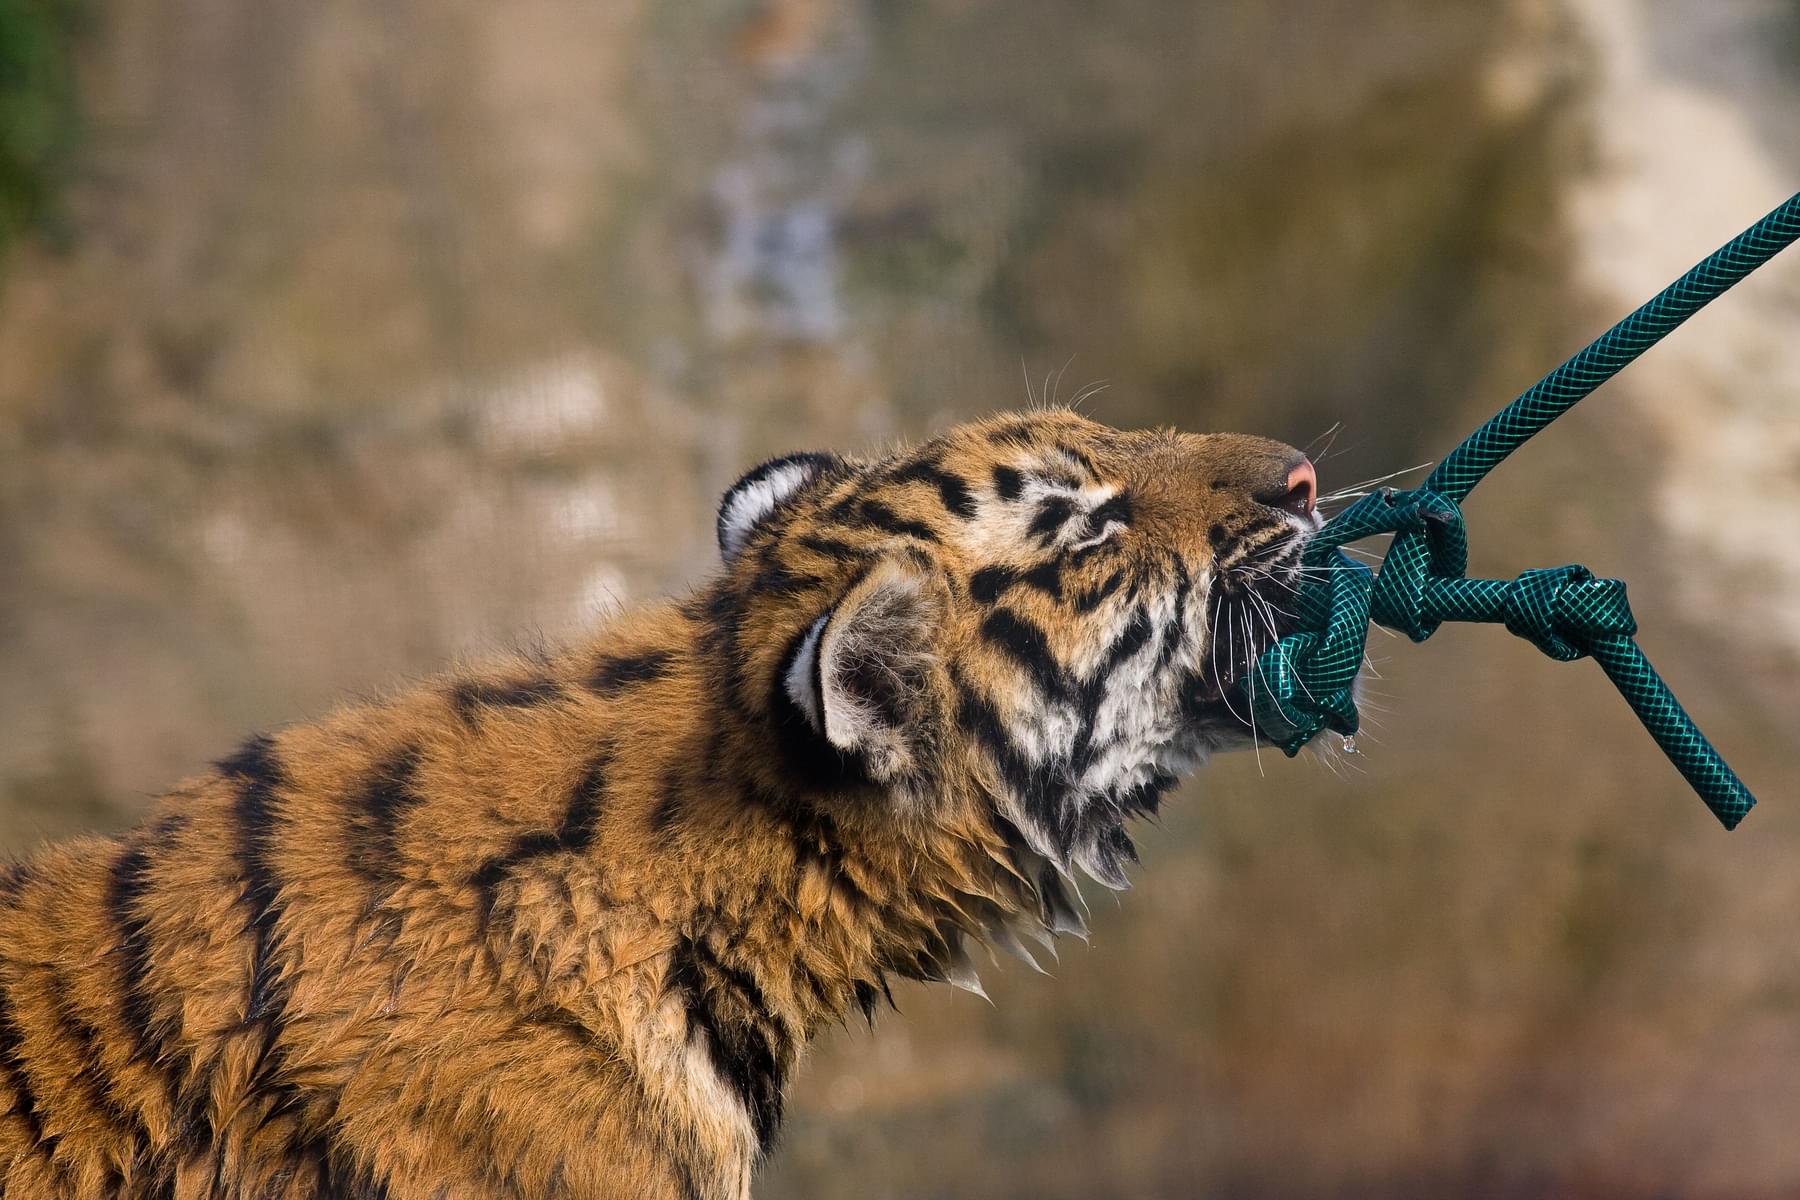 Tug of War with Tiger